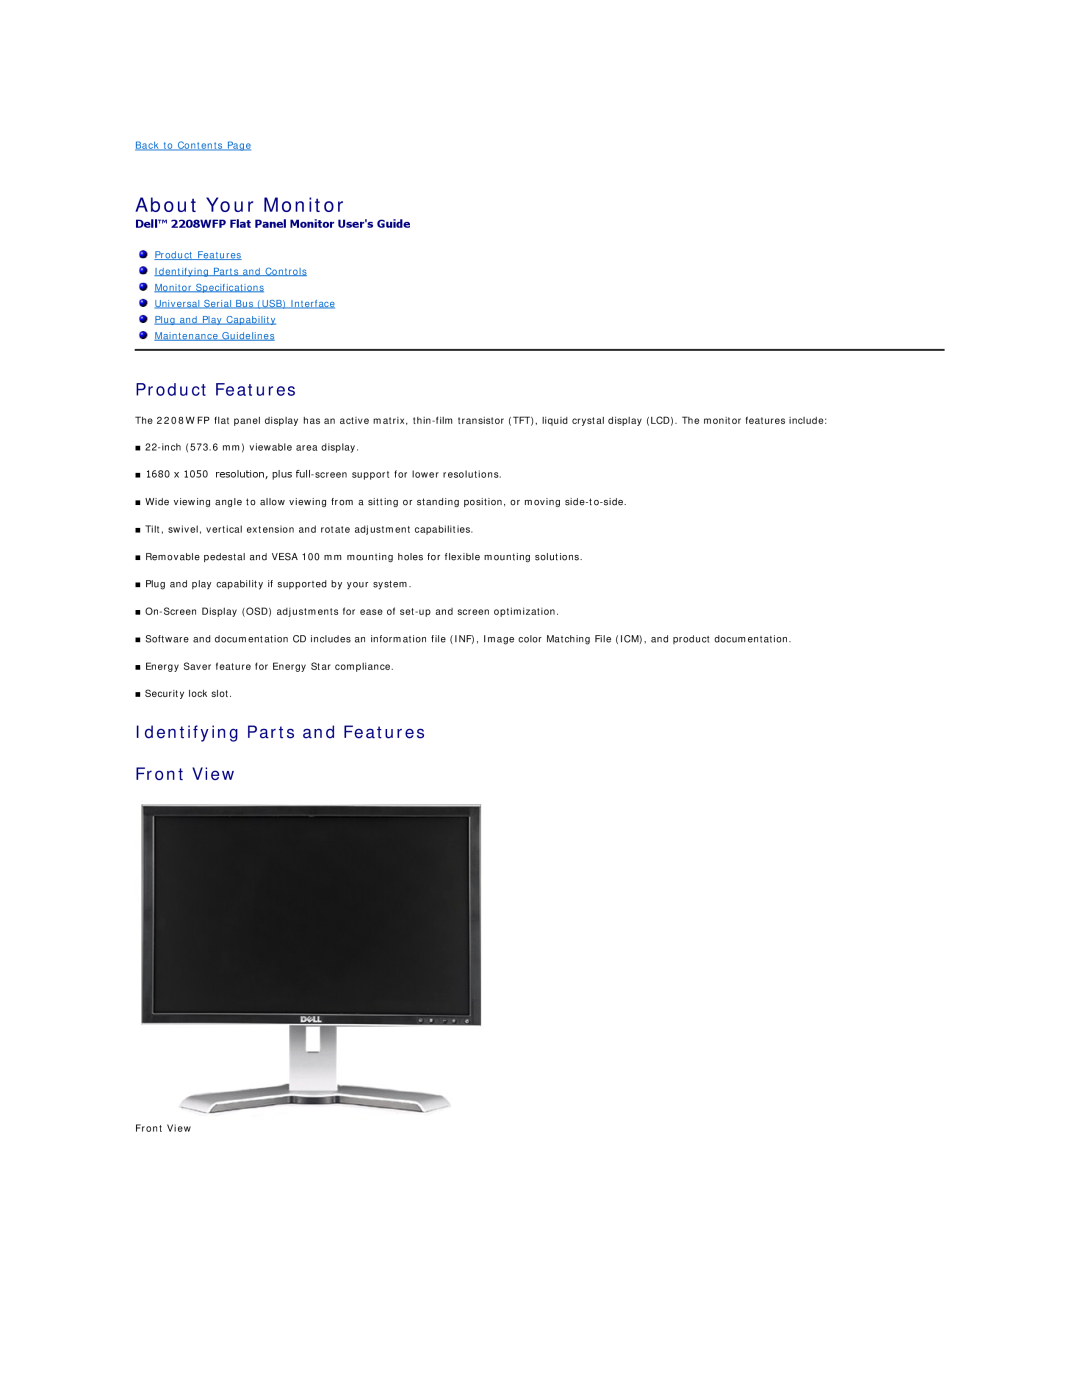 Dell 3309WFP About Your Monitor, Product Features, Identifying Parts and Features Front View, Back to Contents Page 